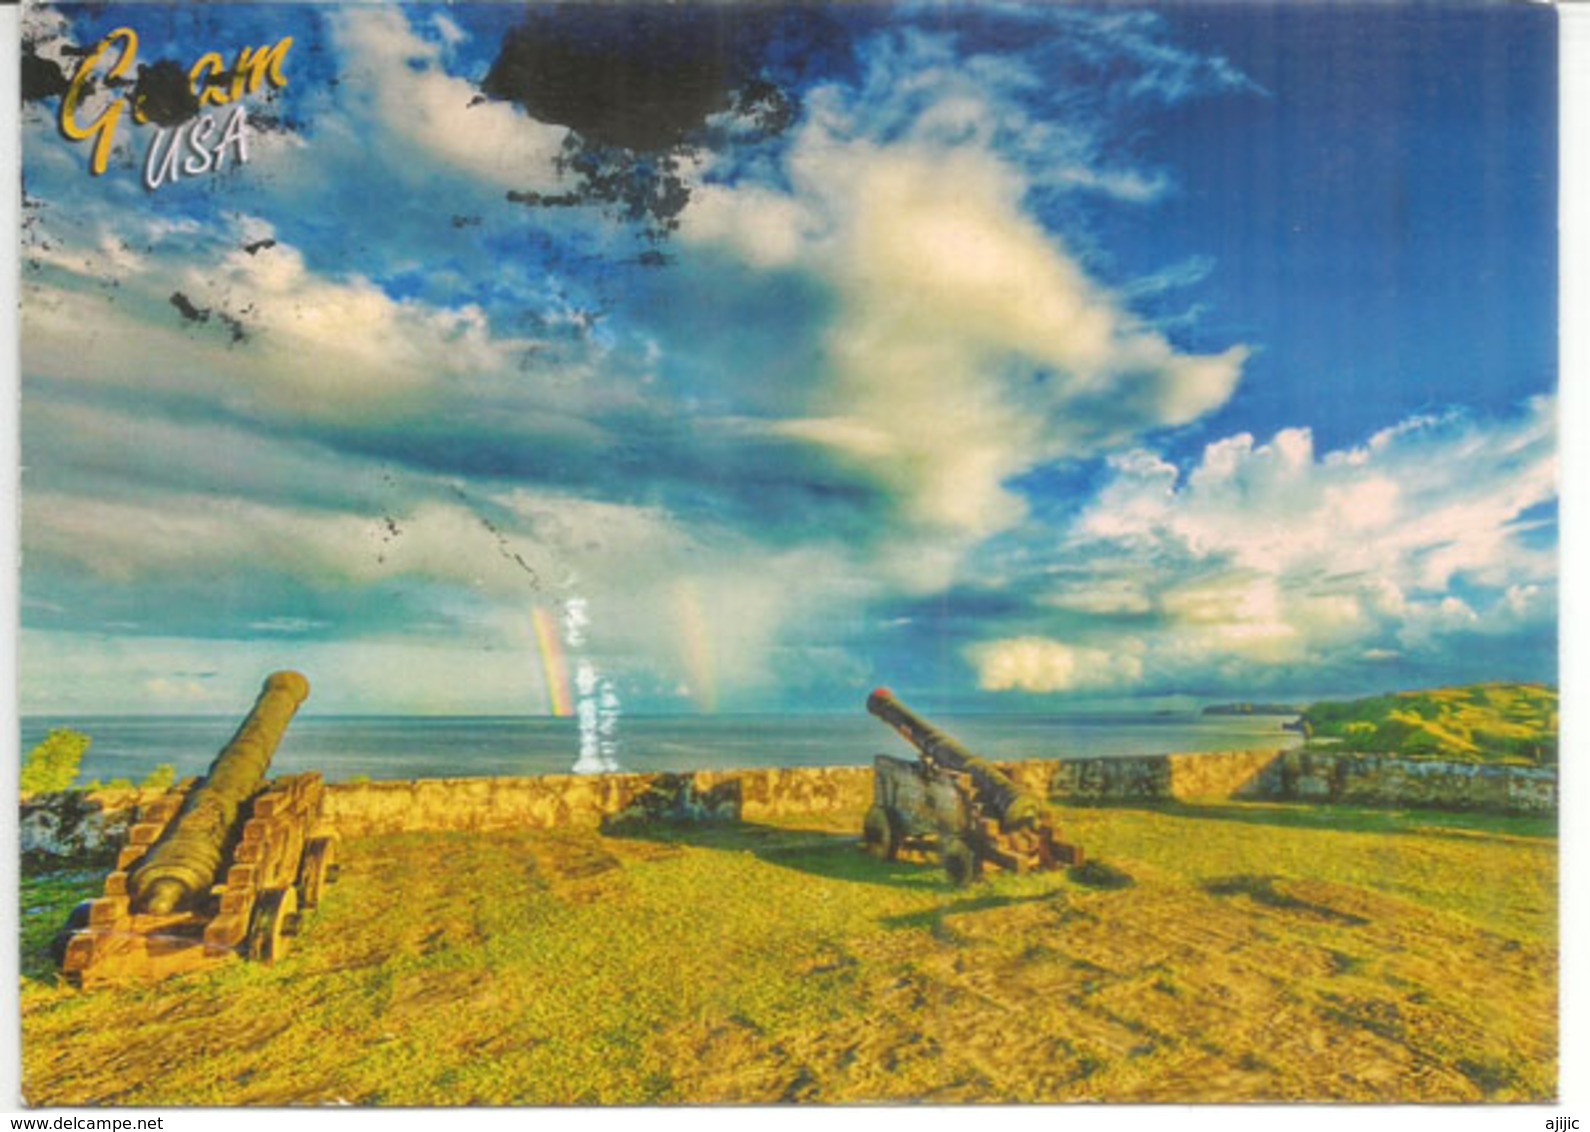 Canons Of Fort Soledad,fort In Umatac, Guam Built By The Spanish In 1810, Postcard From Guam Sent To Andorra - Guam